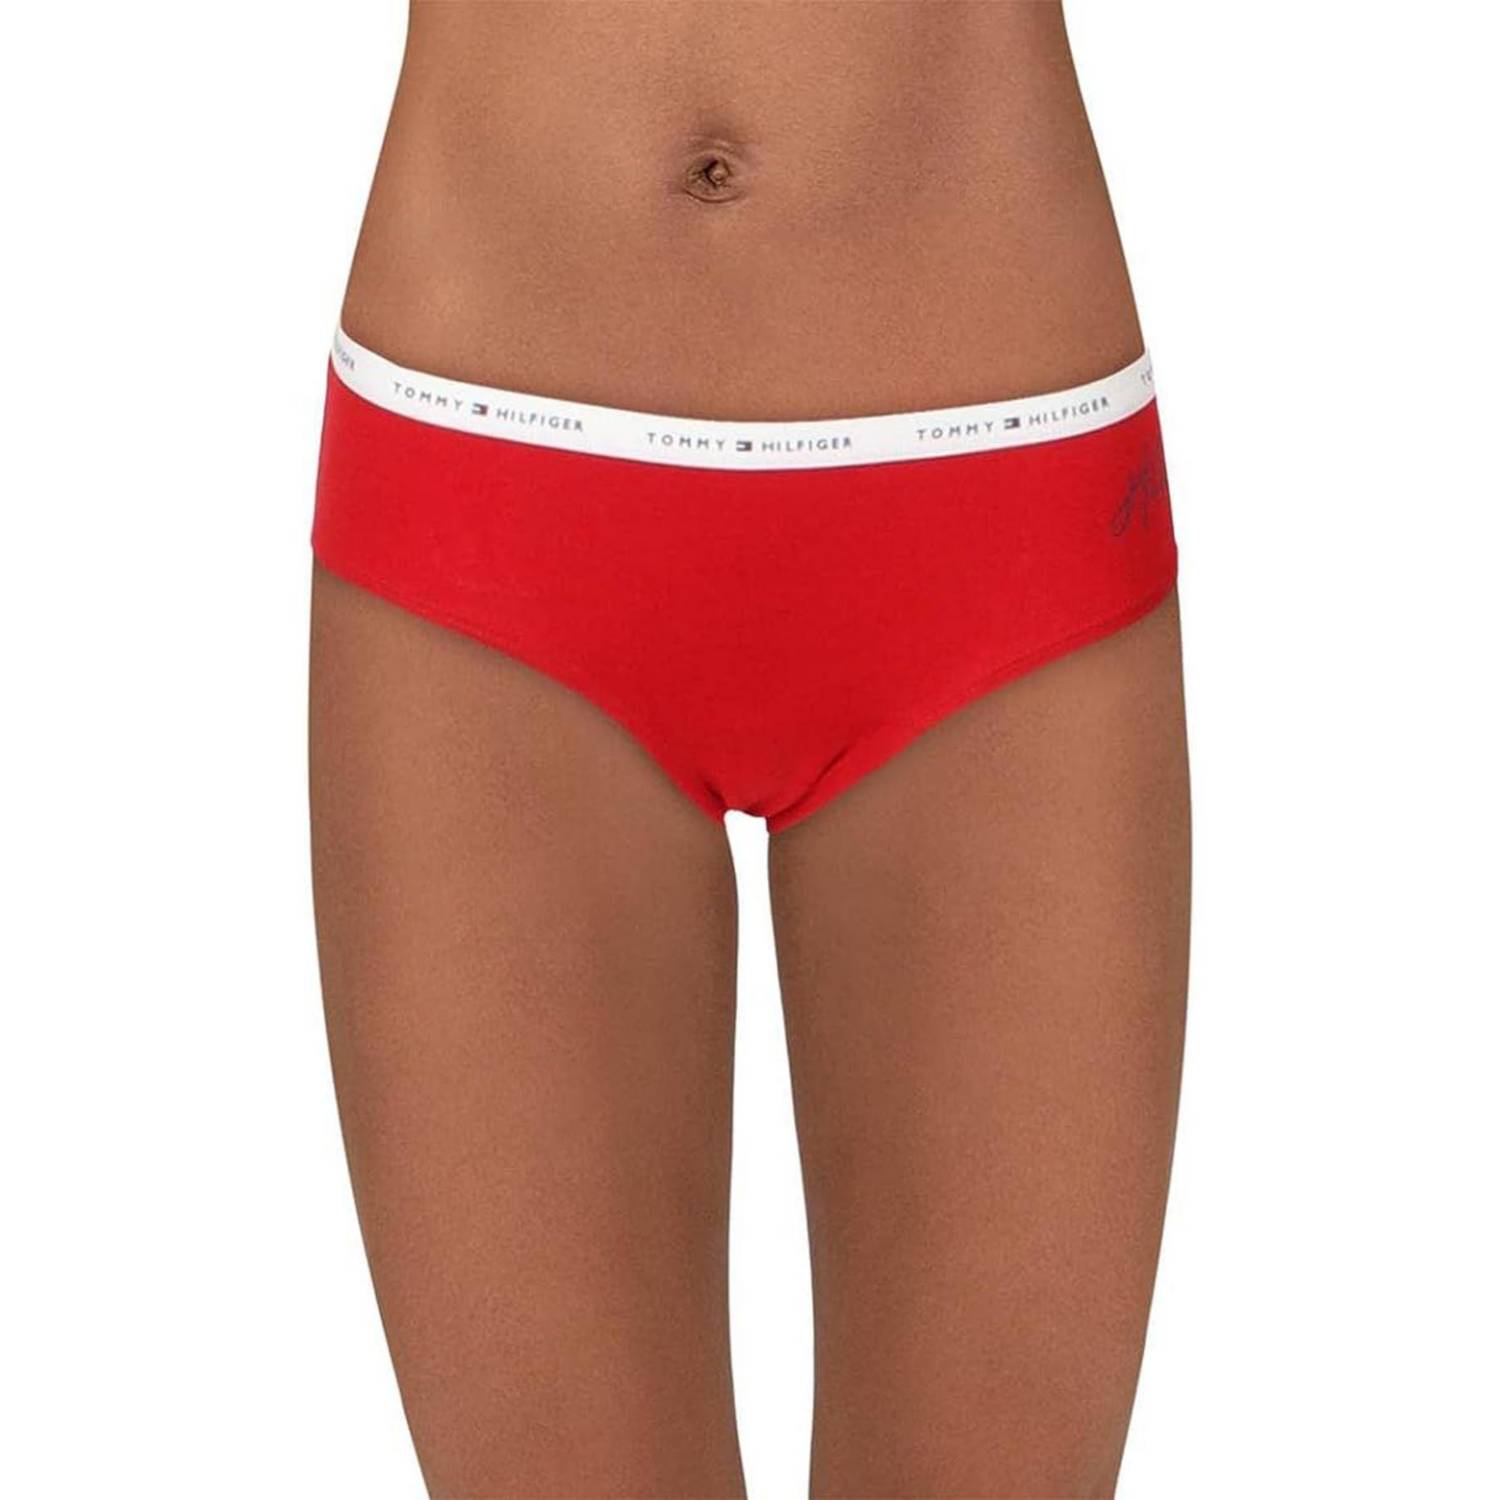 Panties Mujer Rojo Tommy Hilfiger Mujer Rojo Tommy Hilfiger TOMMY